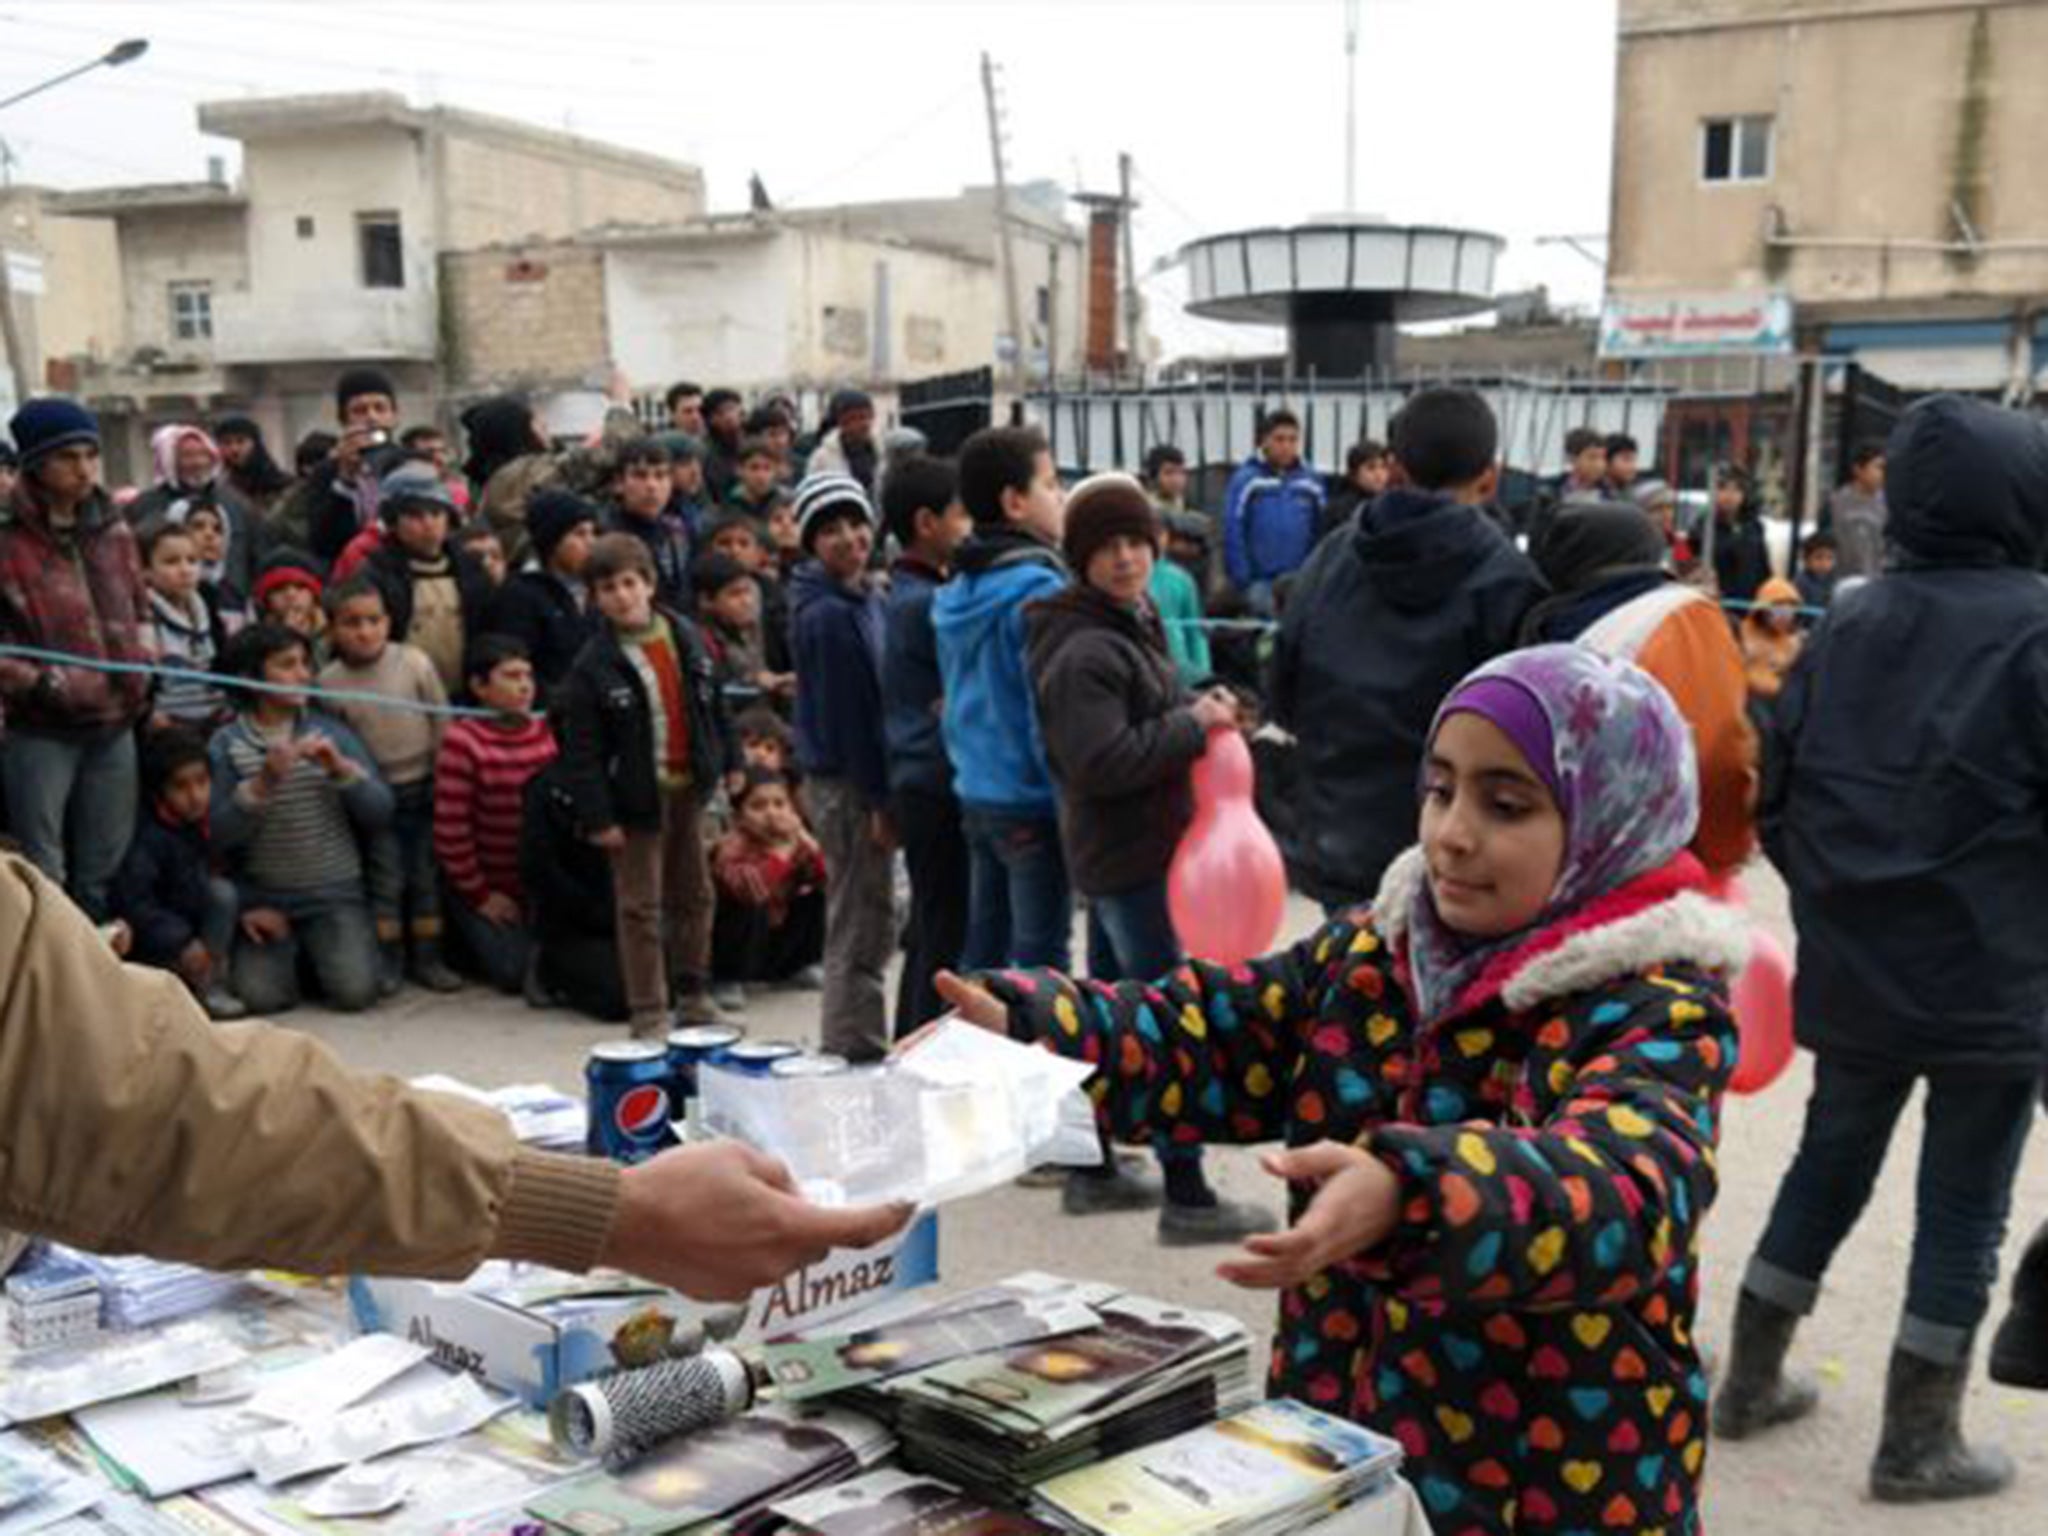 An Isis militant, left, distributes biscuits, along with religious pamphlets to a Syrian young girl, right, during a street preaching event in Raqqa